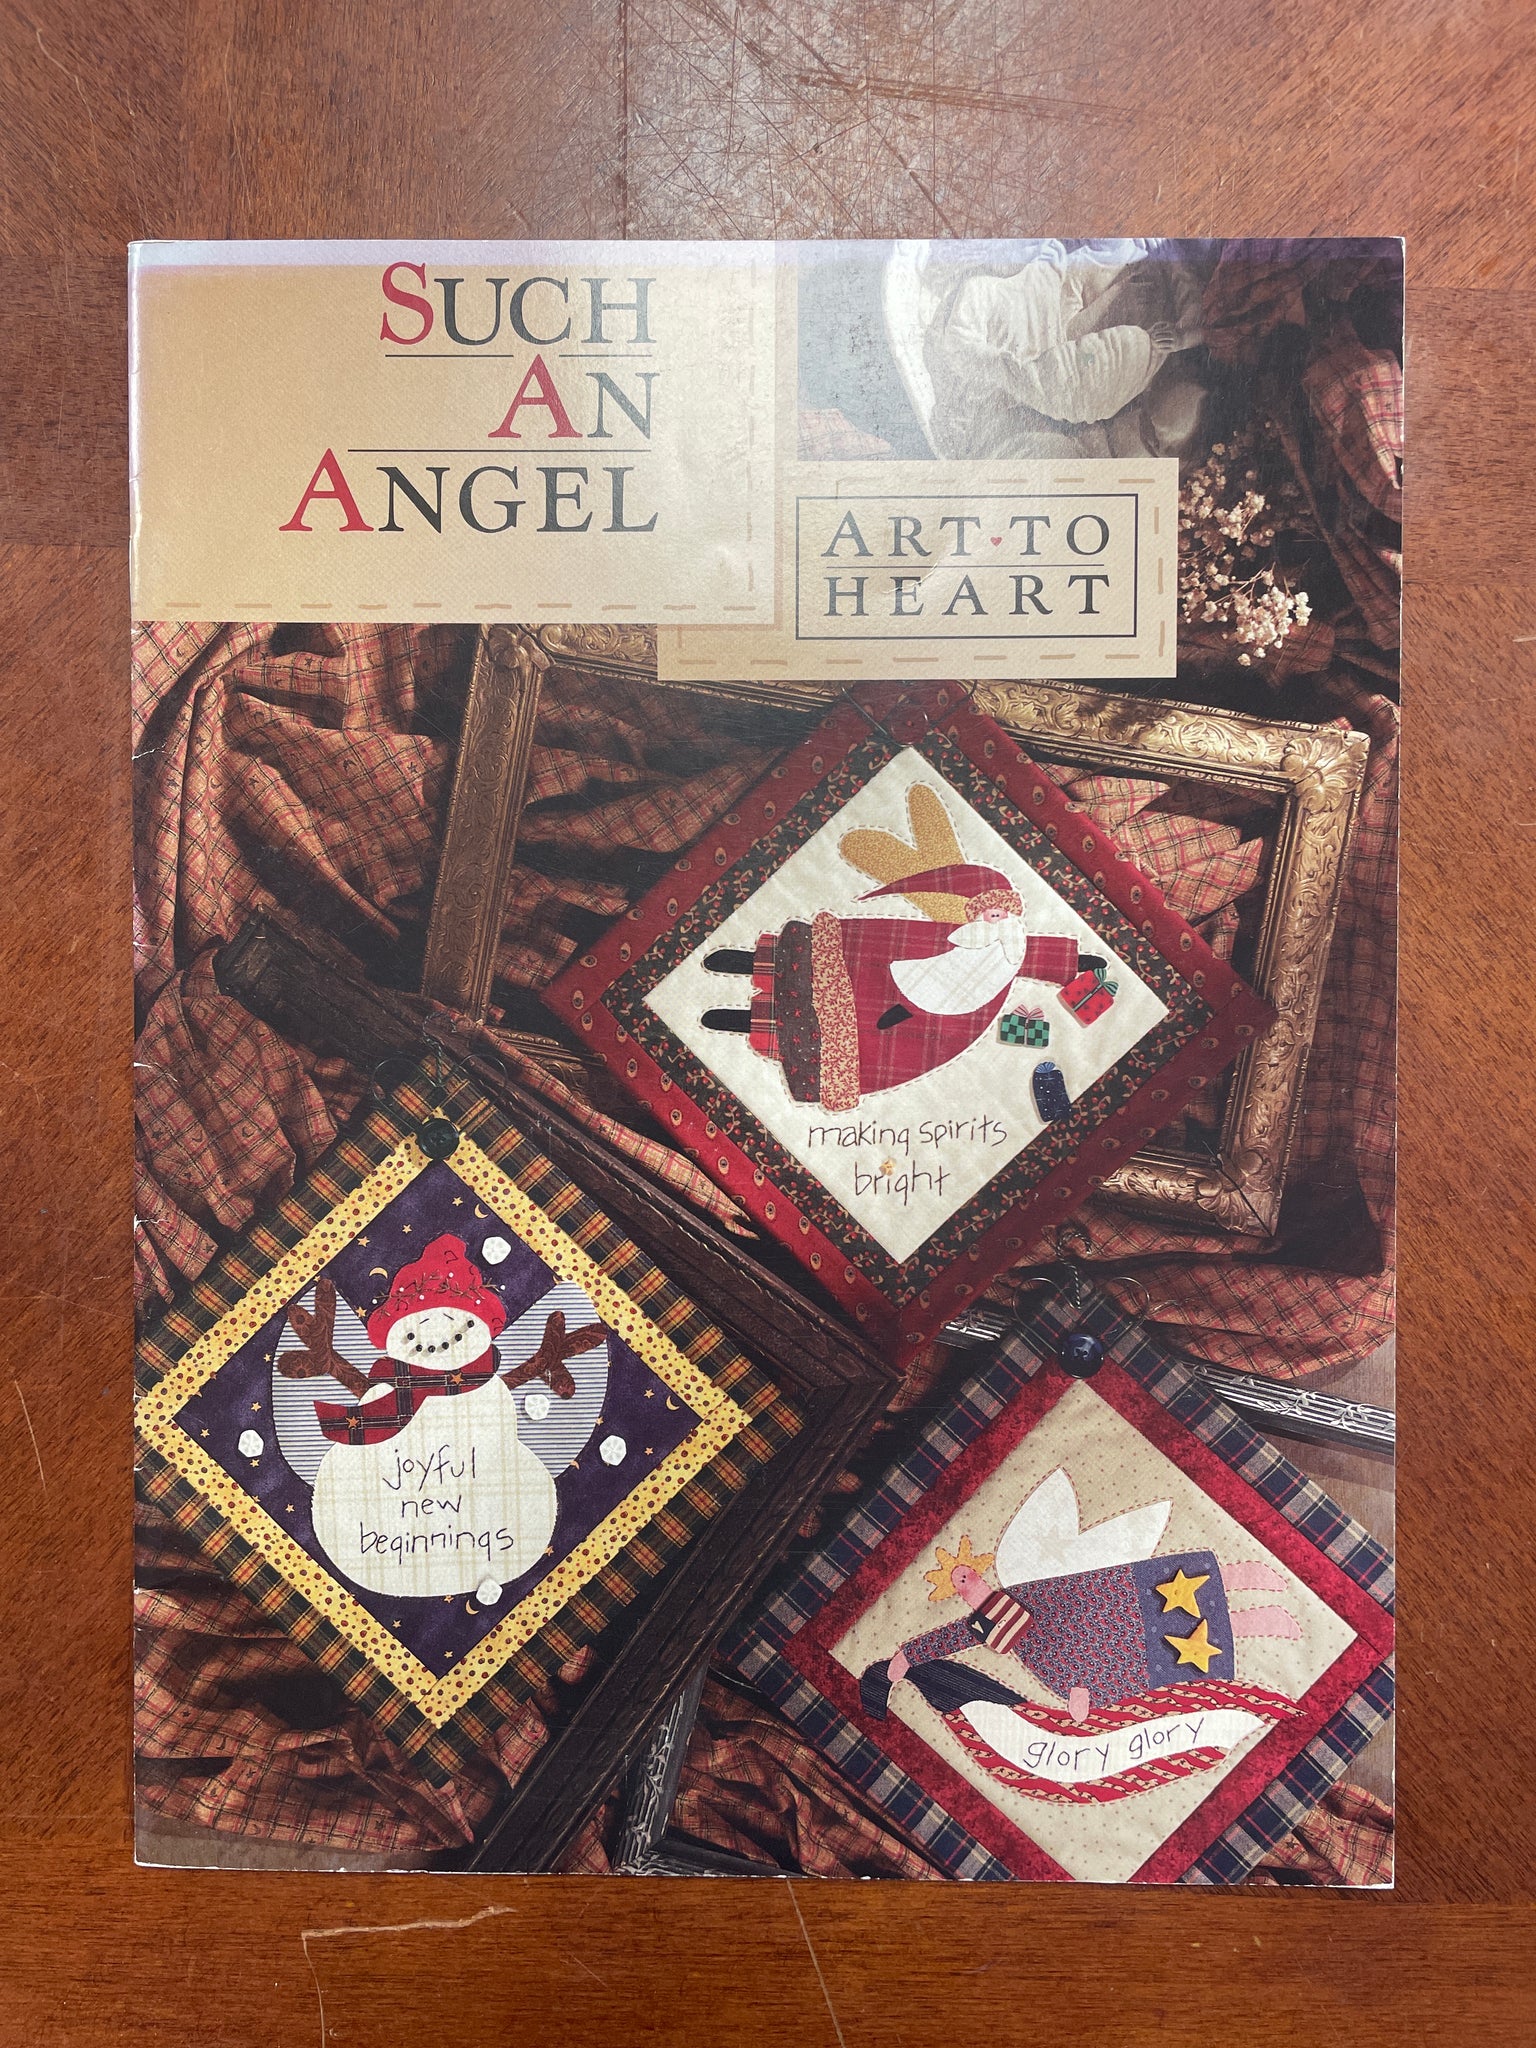 1998 Quilted Appliqué Pattern Book - "Such An Angel"